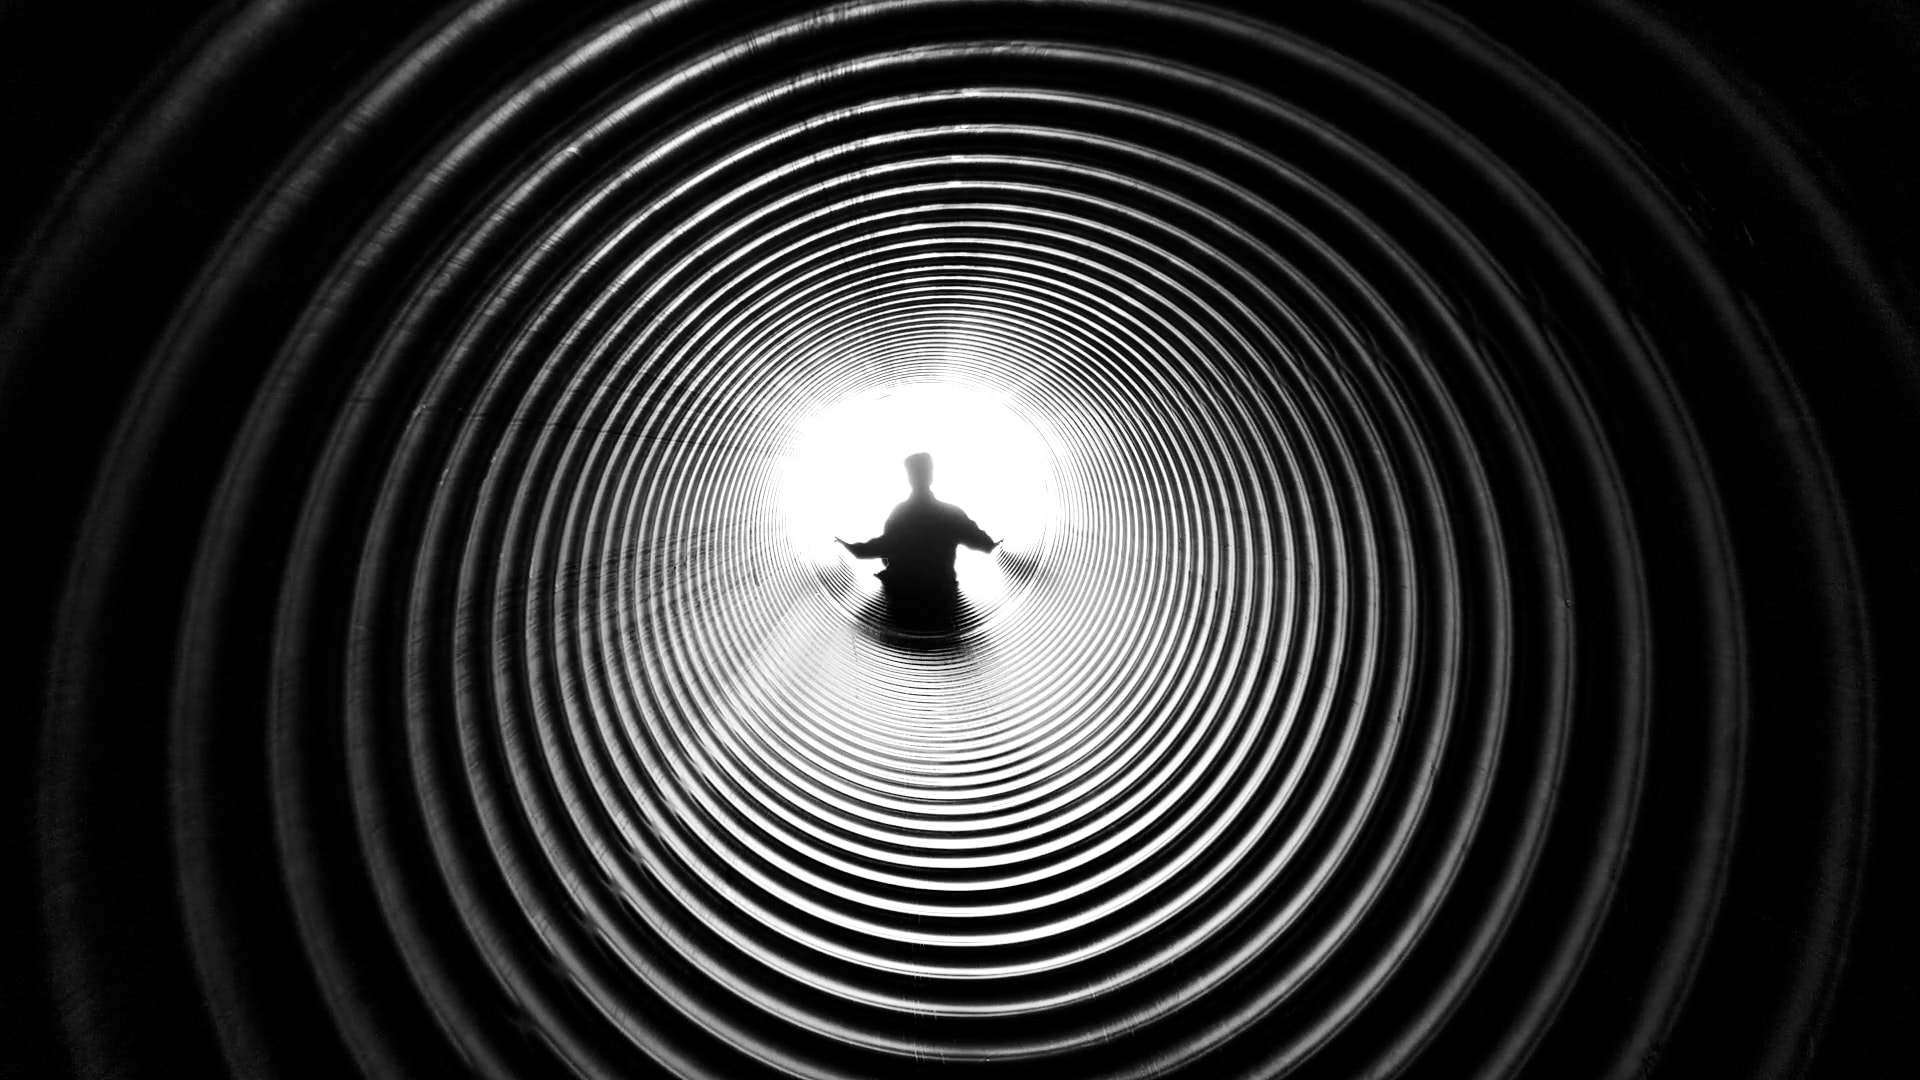 Looking down a dark tunnel with a figure at the end - the data void